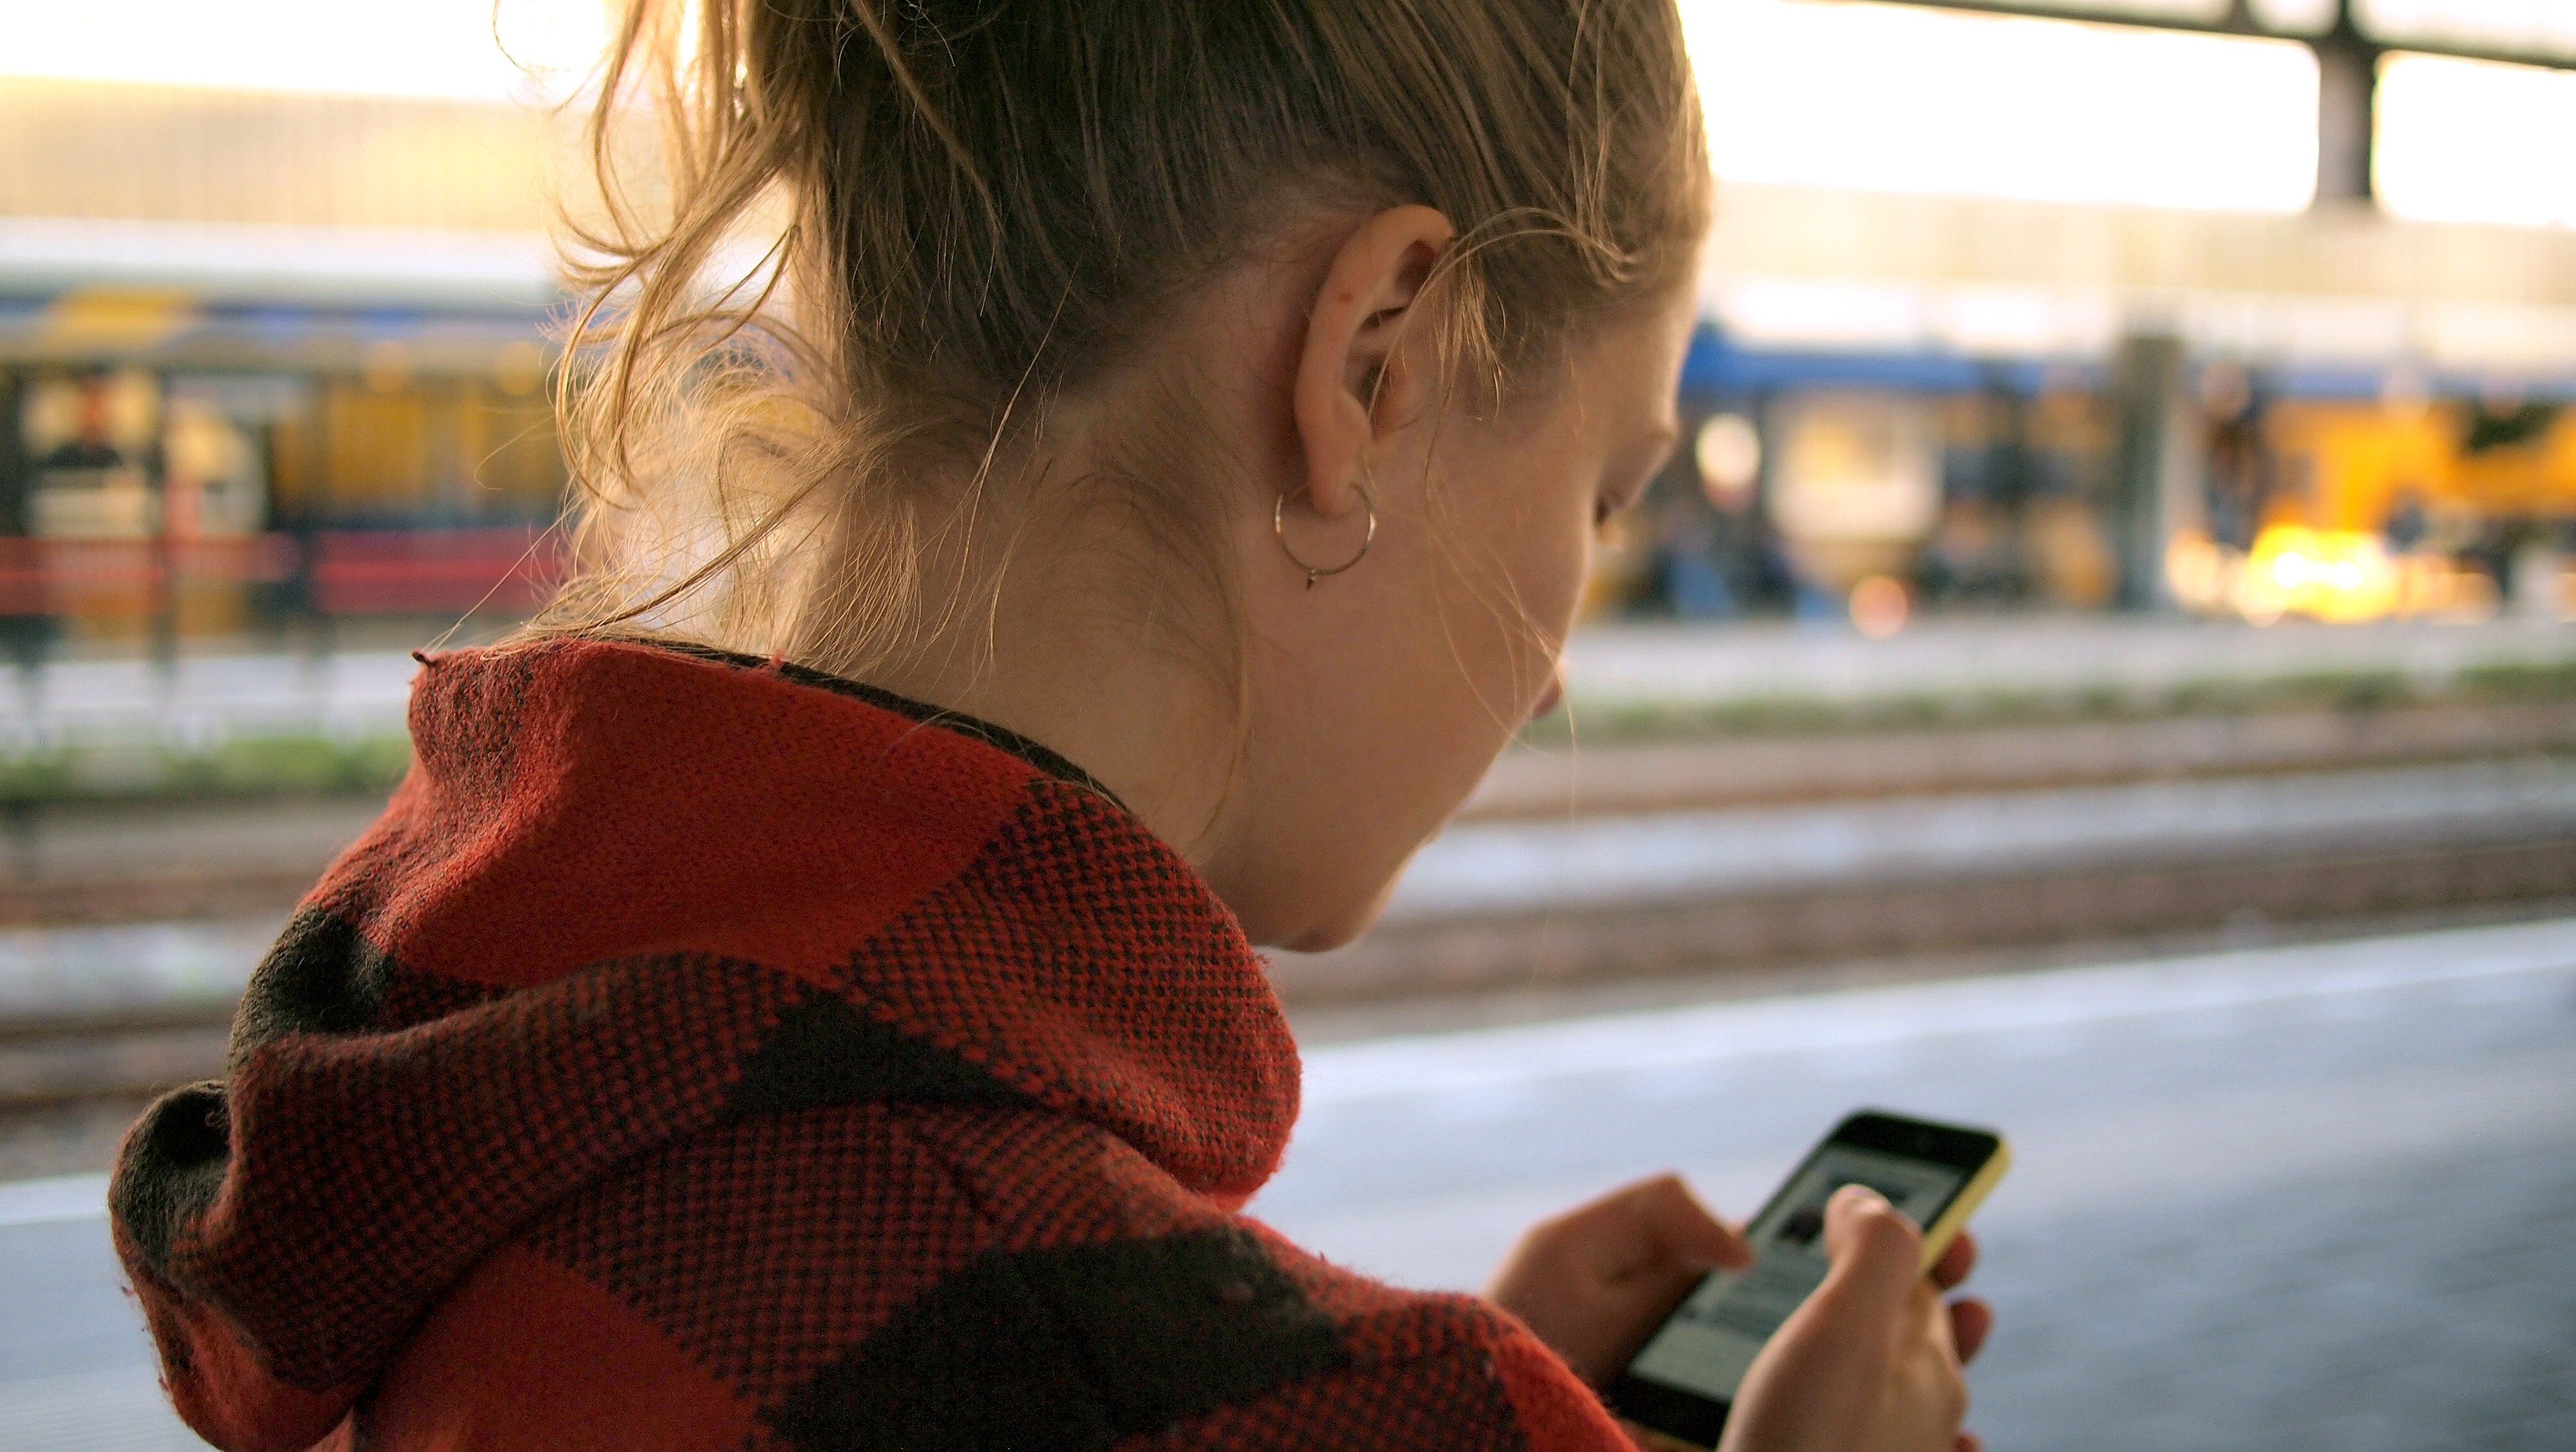 blond woman searching smartphone at trainstation